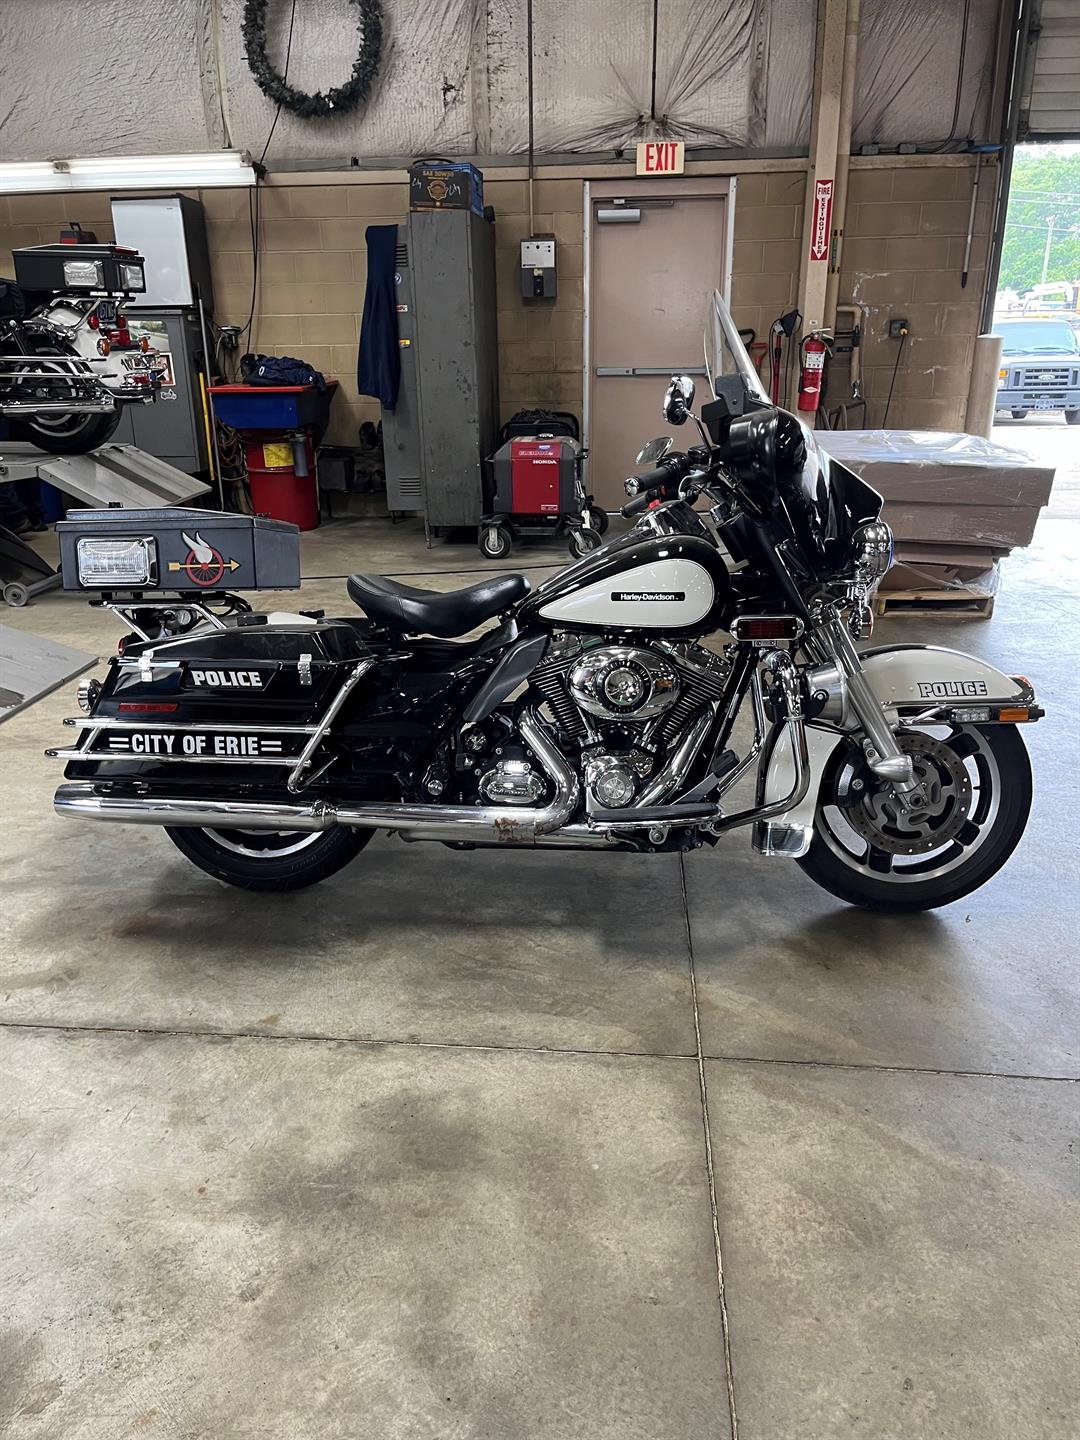 City of Erie Police Department Auctioning Off Second Harley Davidson Motorcycle